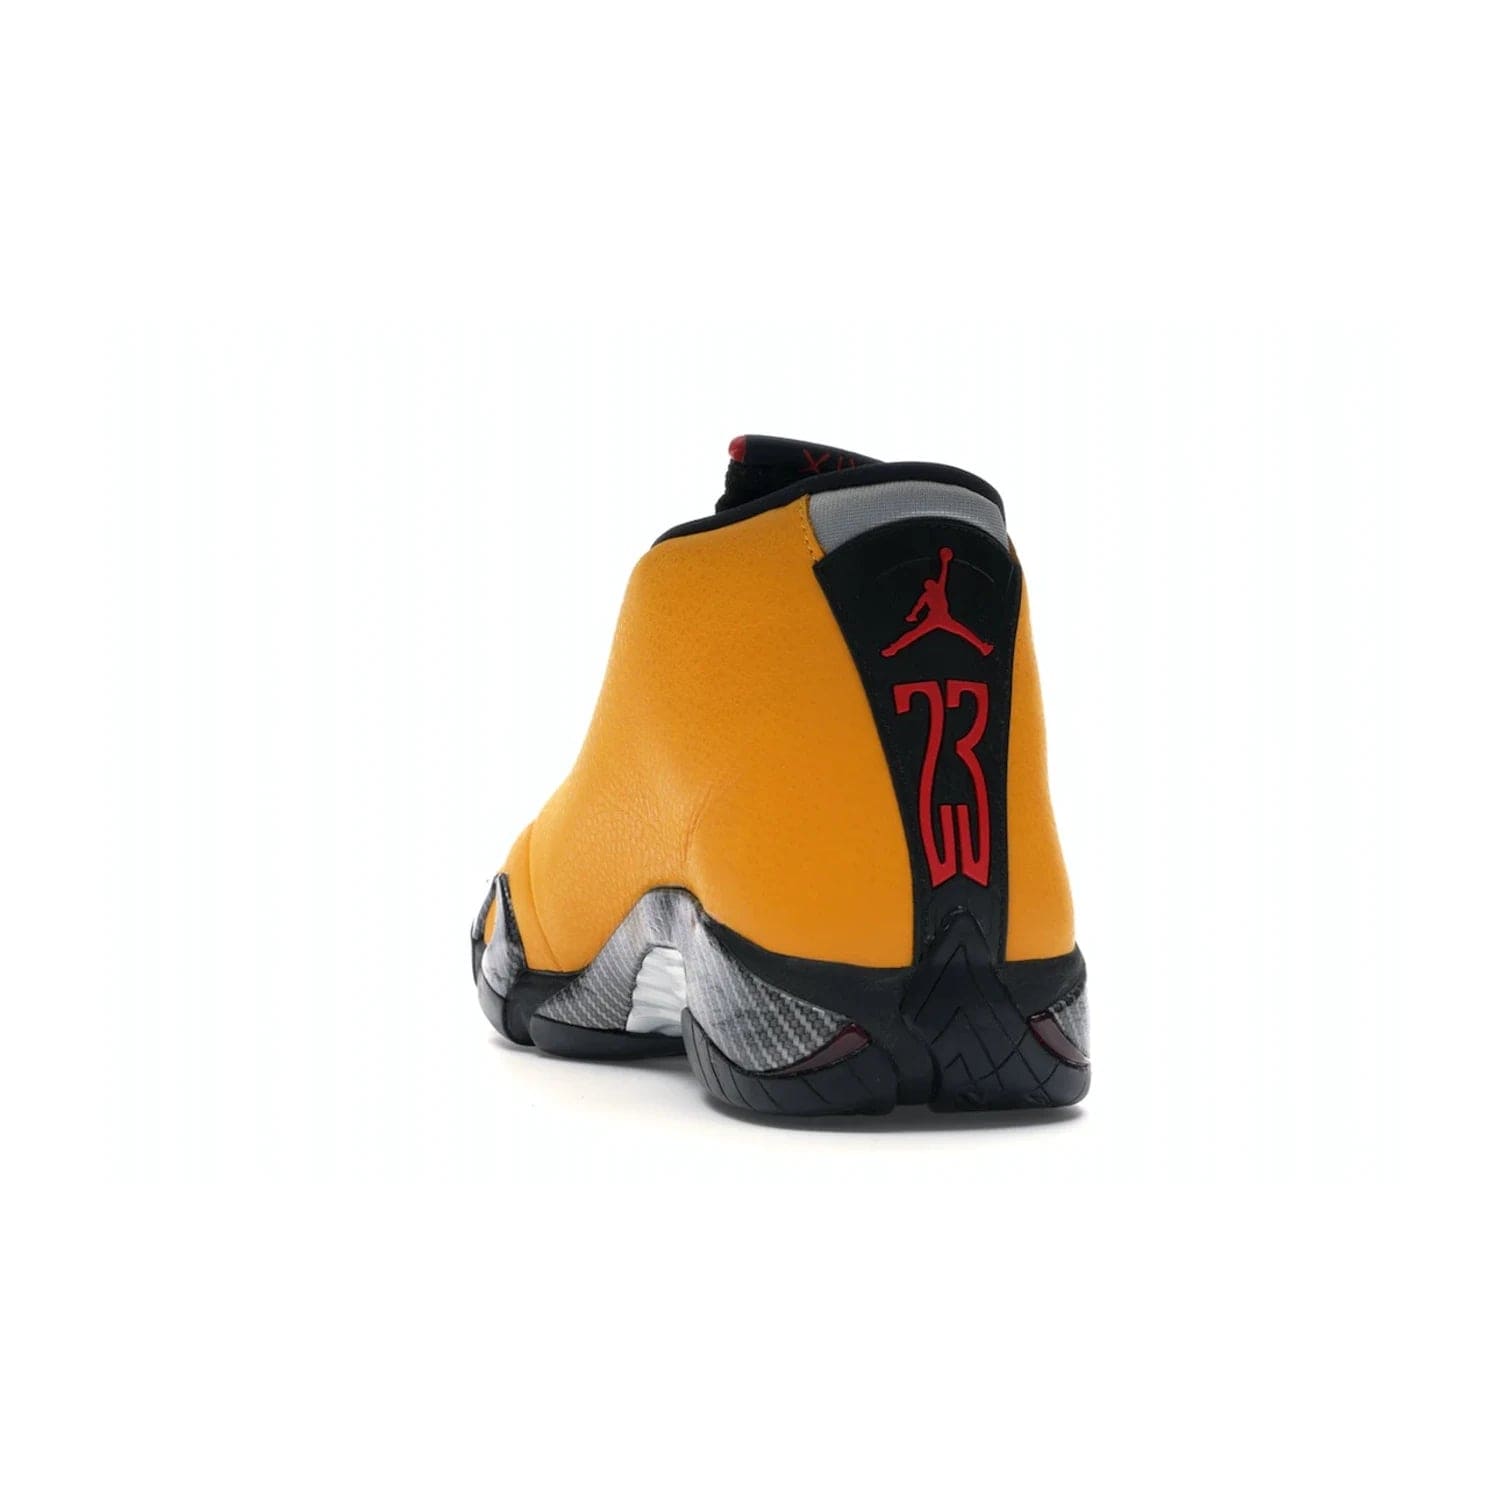 Jordan 14 Retro University Gold - Image 26 - Only at www.BallersClubKickz.com - Air Jordan 14 Retro University Gold: High-quality leather sneaker with Jumpman, tongue & heel logos. Zoom Air units & herringbone traction for superior comfort. University Gold outsole for stylish streetwear.